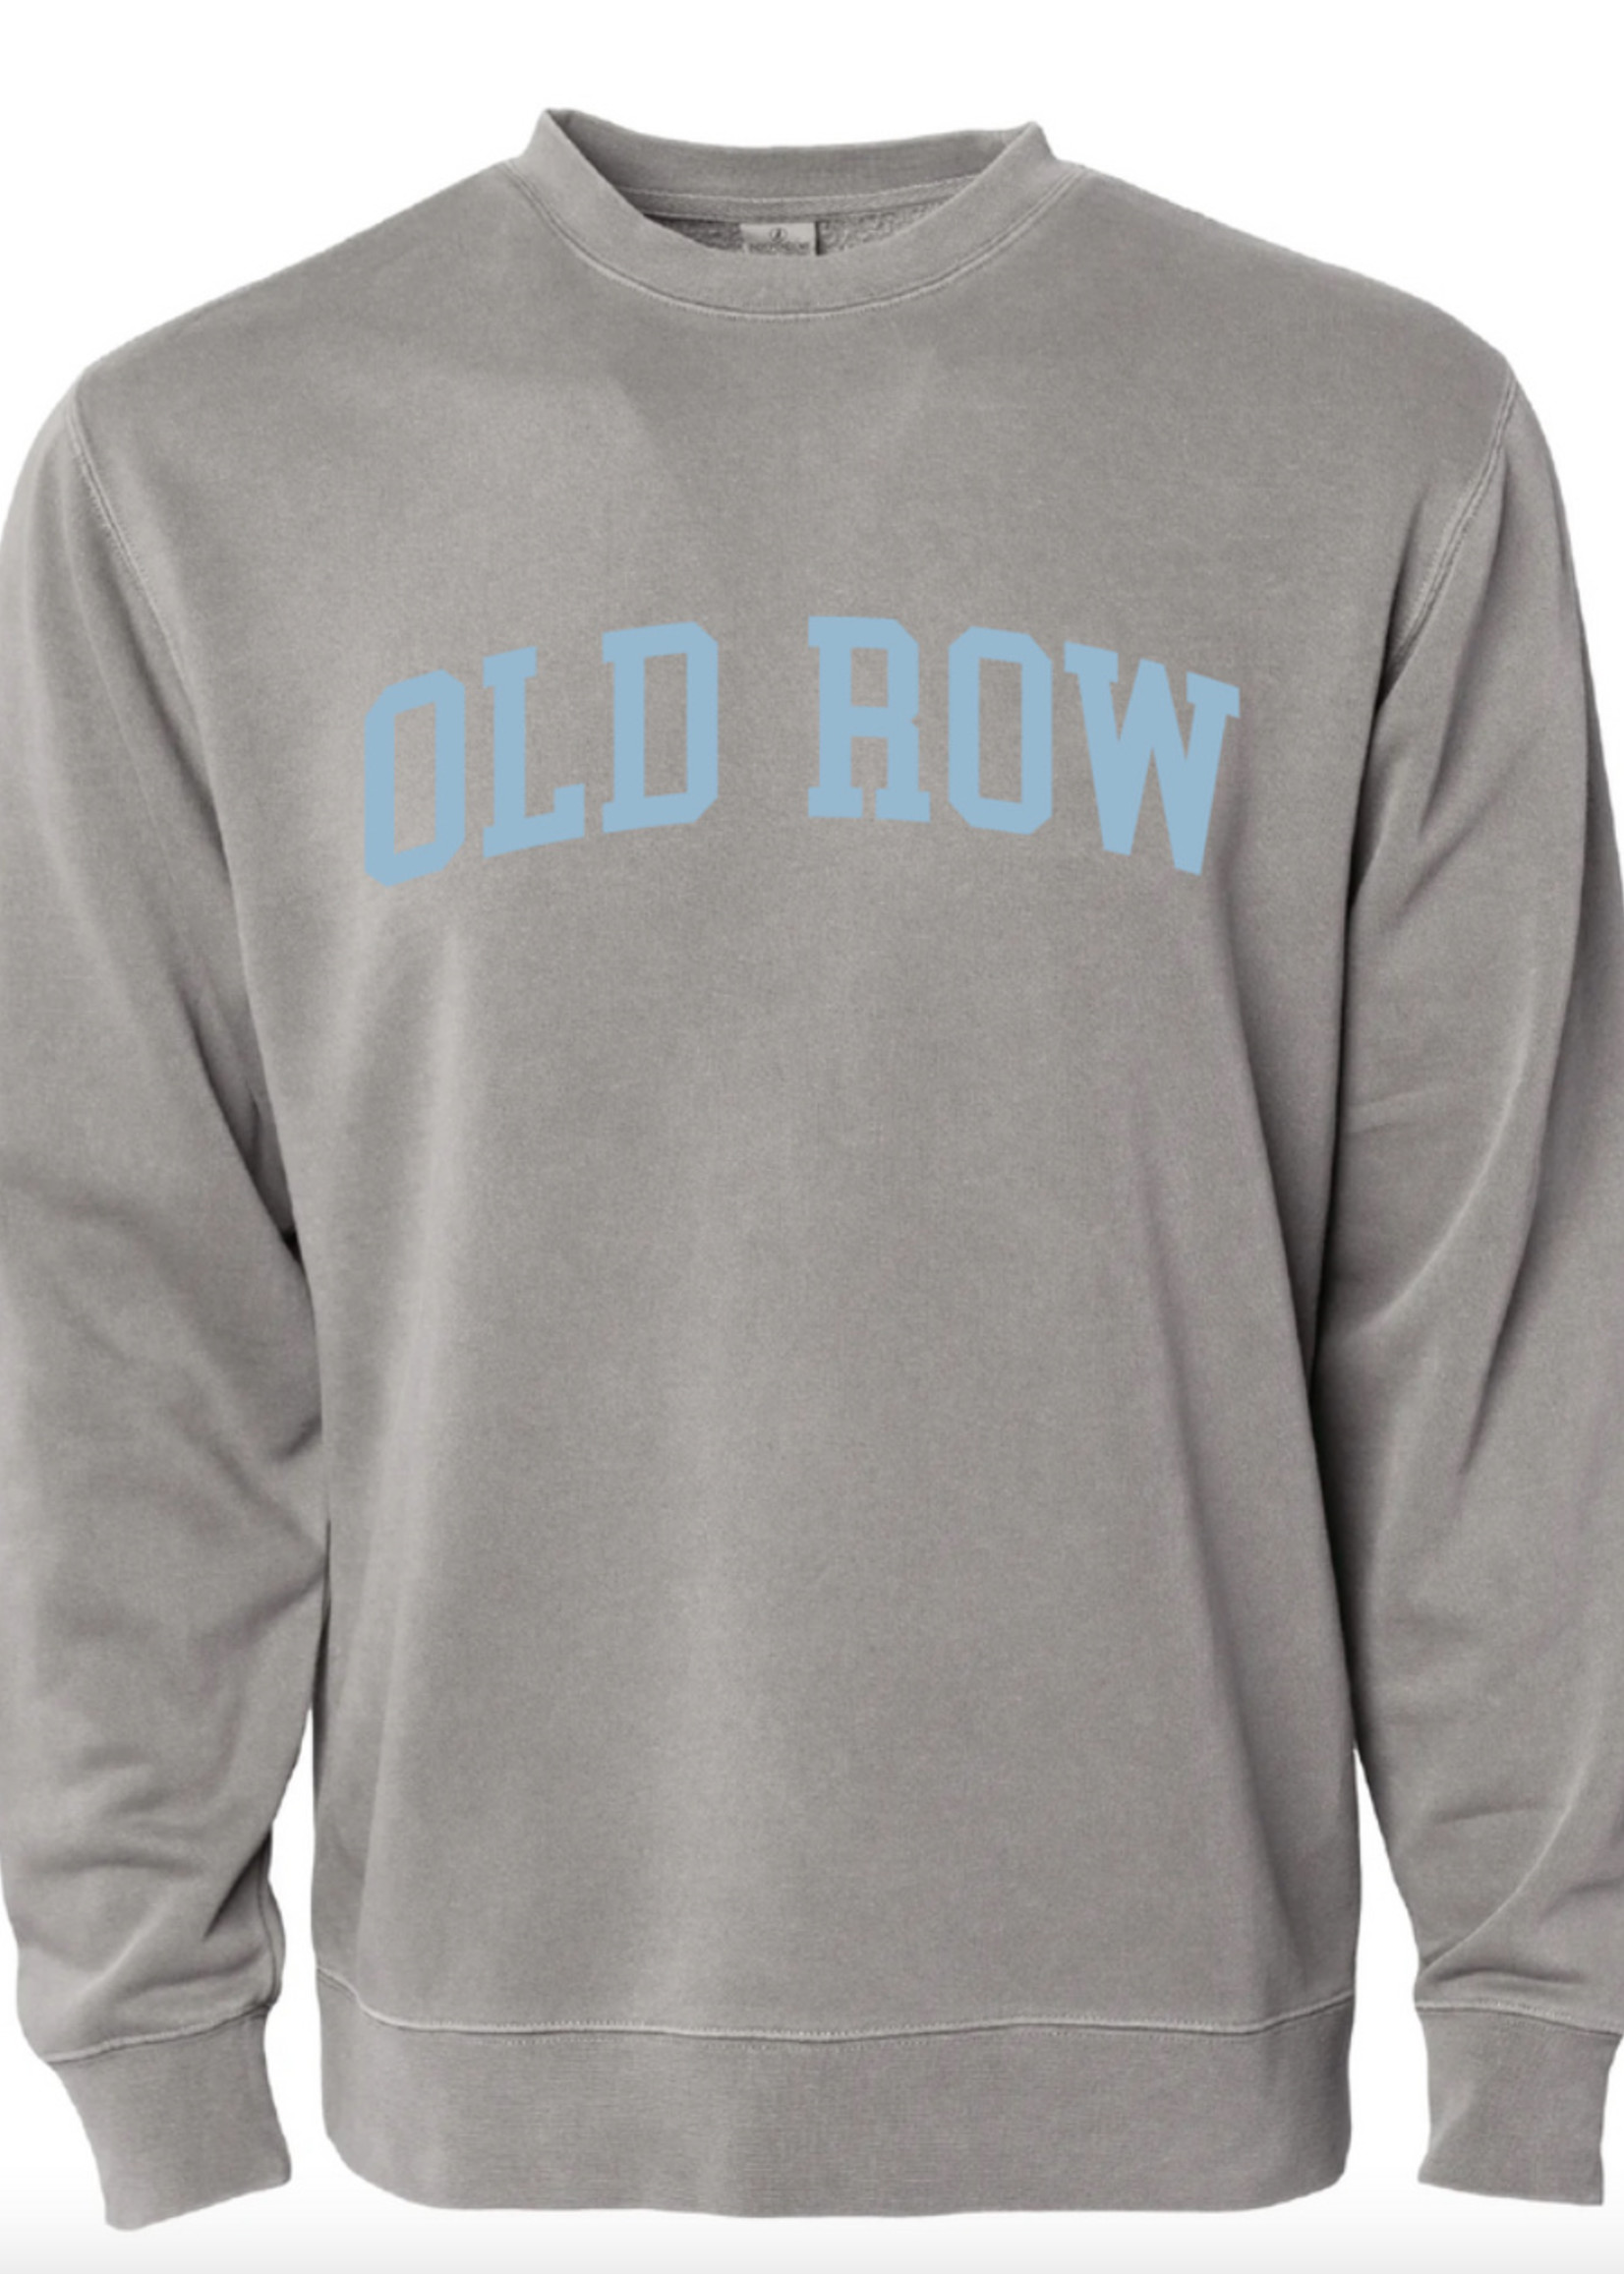 Old Row Old Row - Pigment Dyed Crewneck 2.0